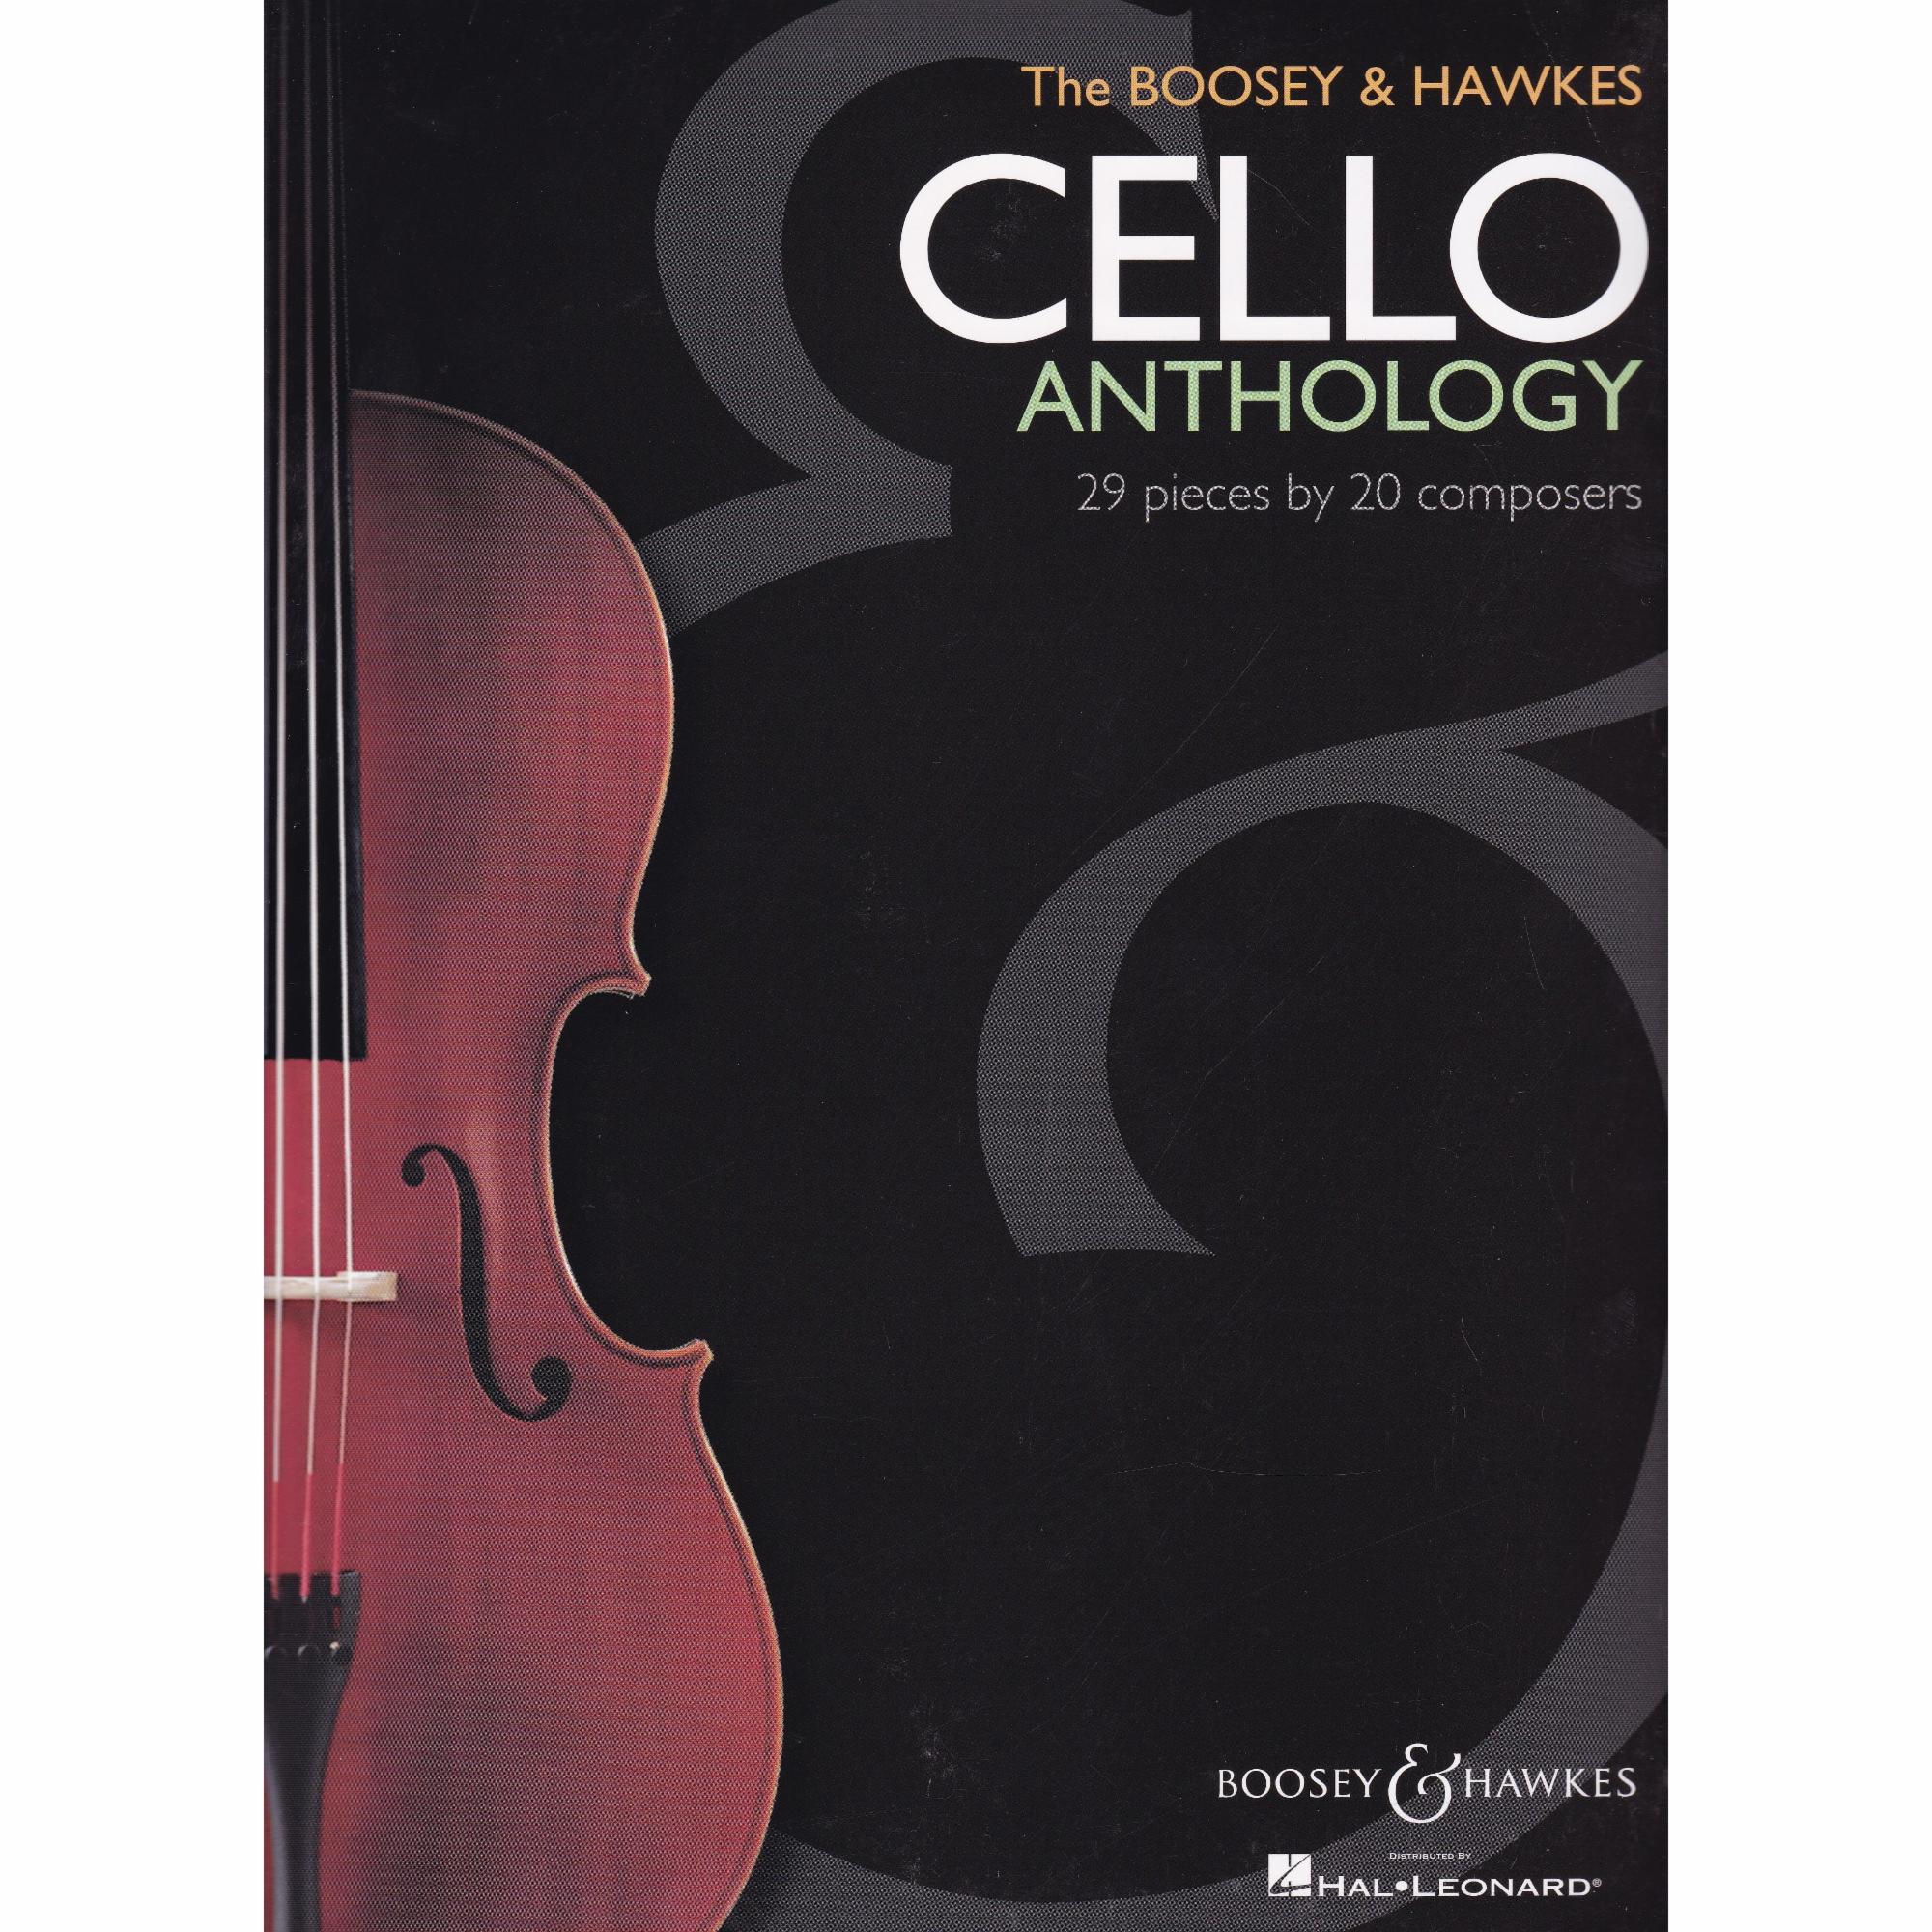 The Boosey and Hawkes Cello Anthology